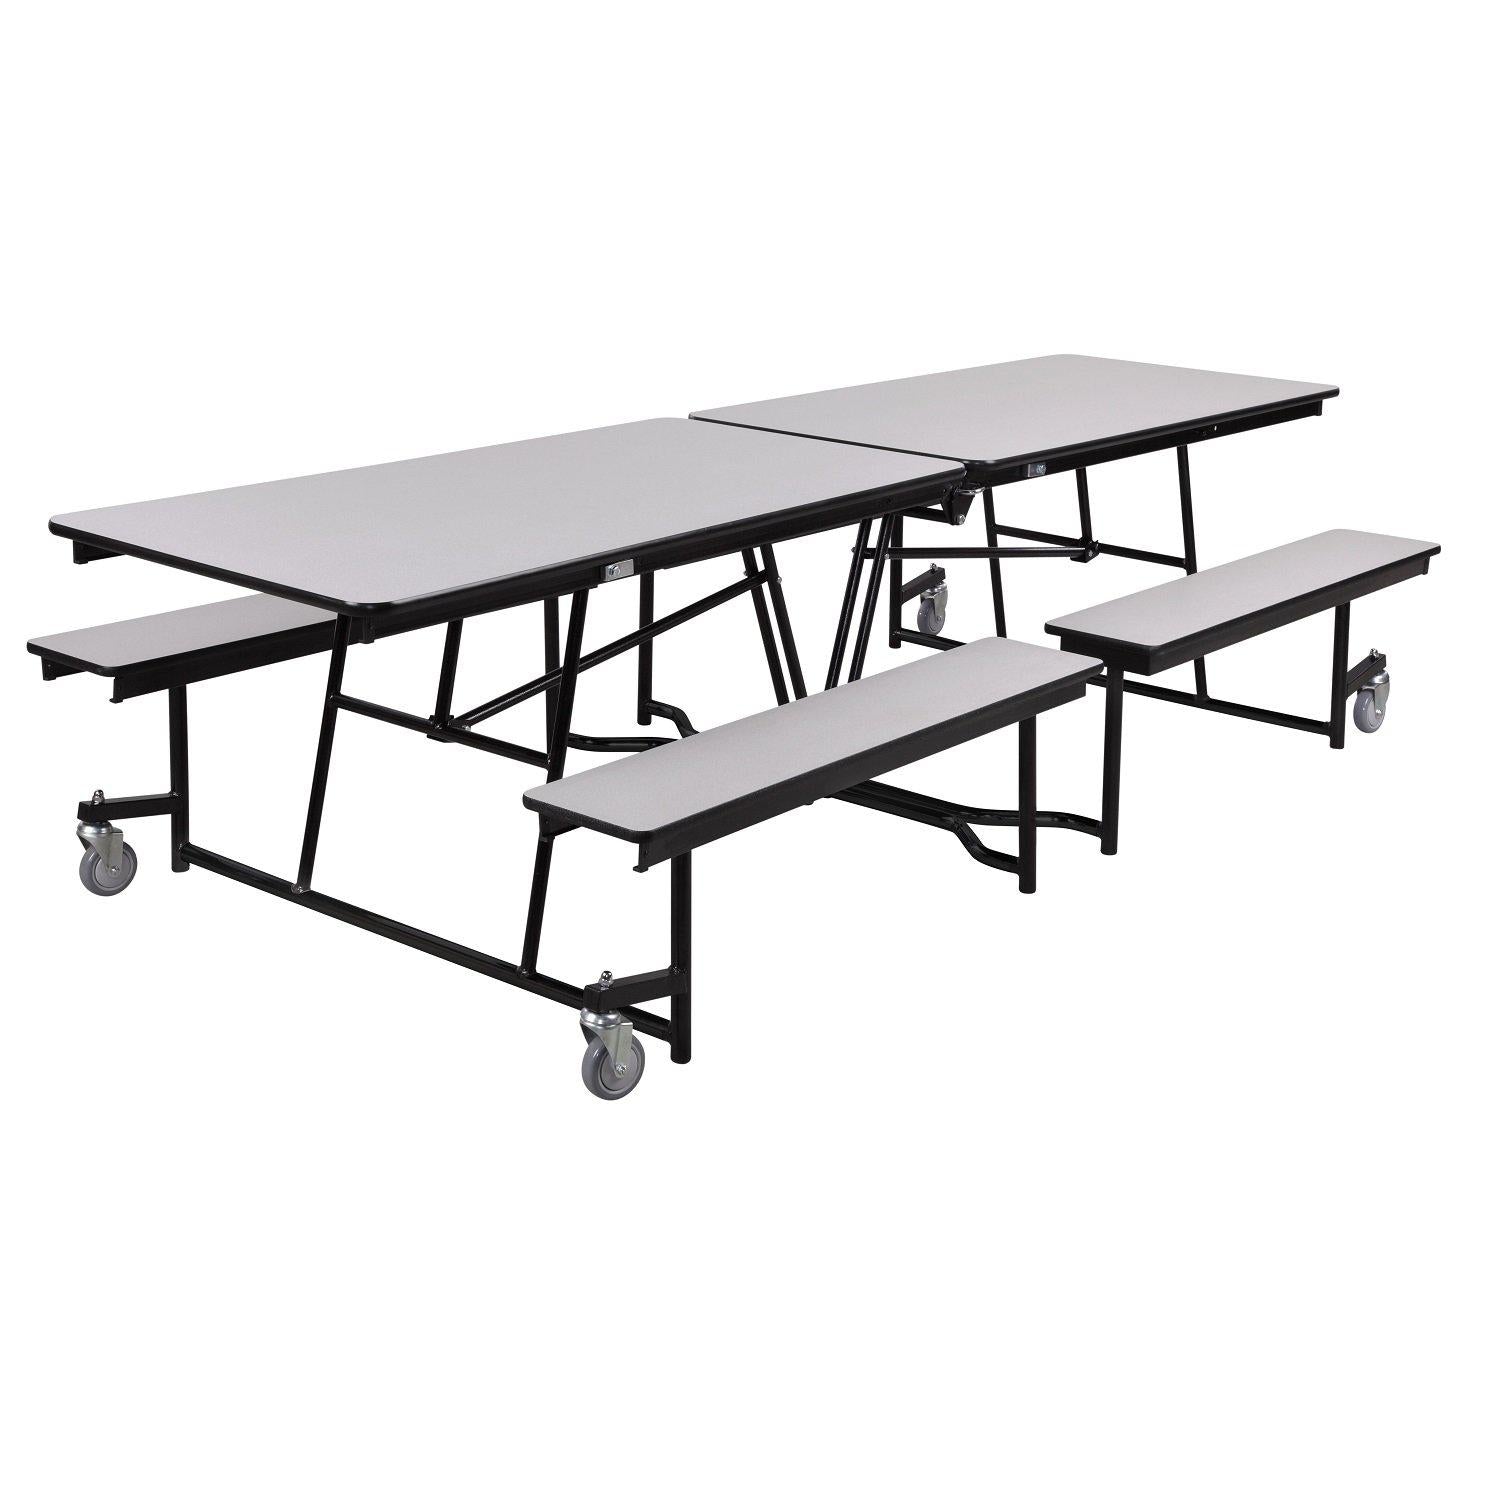 Mobile Cafeteria Table with Benches, 10'L, MDF Core, Black ProtectEdge, Textured Black Frame